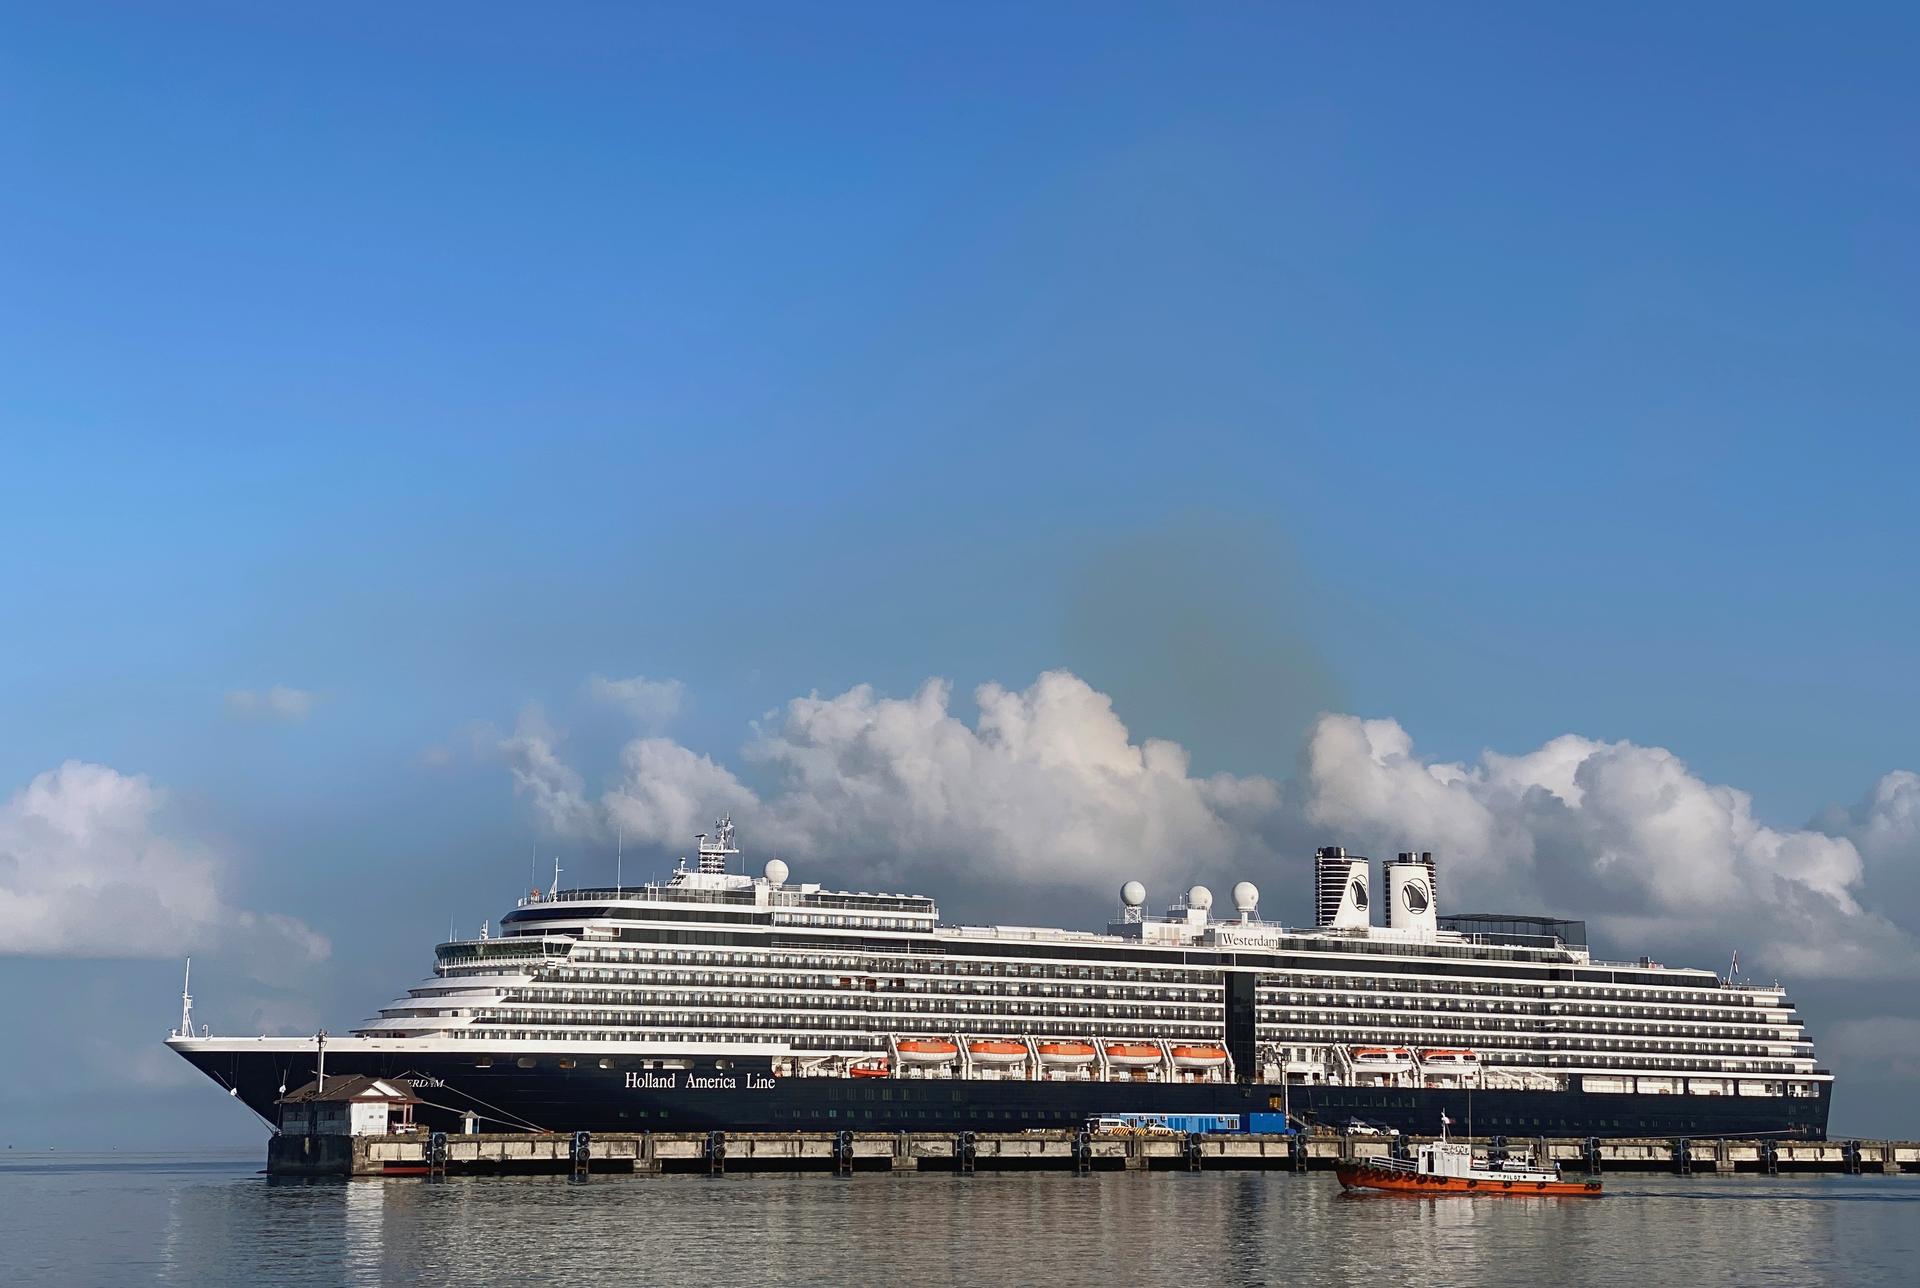 American woman from cruise ship tests positive again for coronavirus in Malaysia